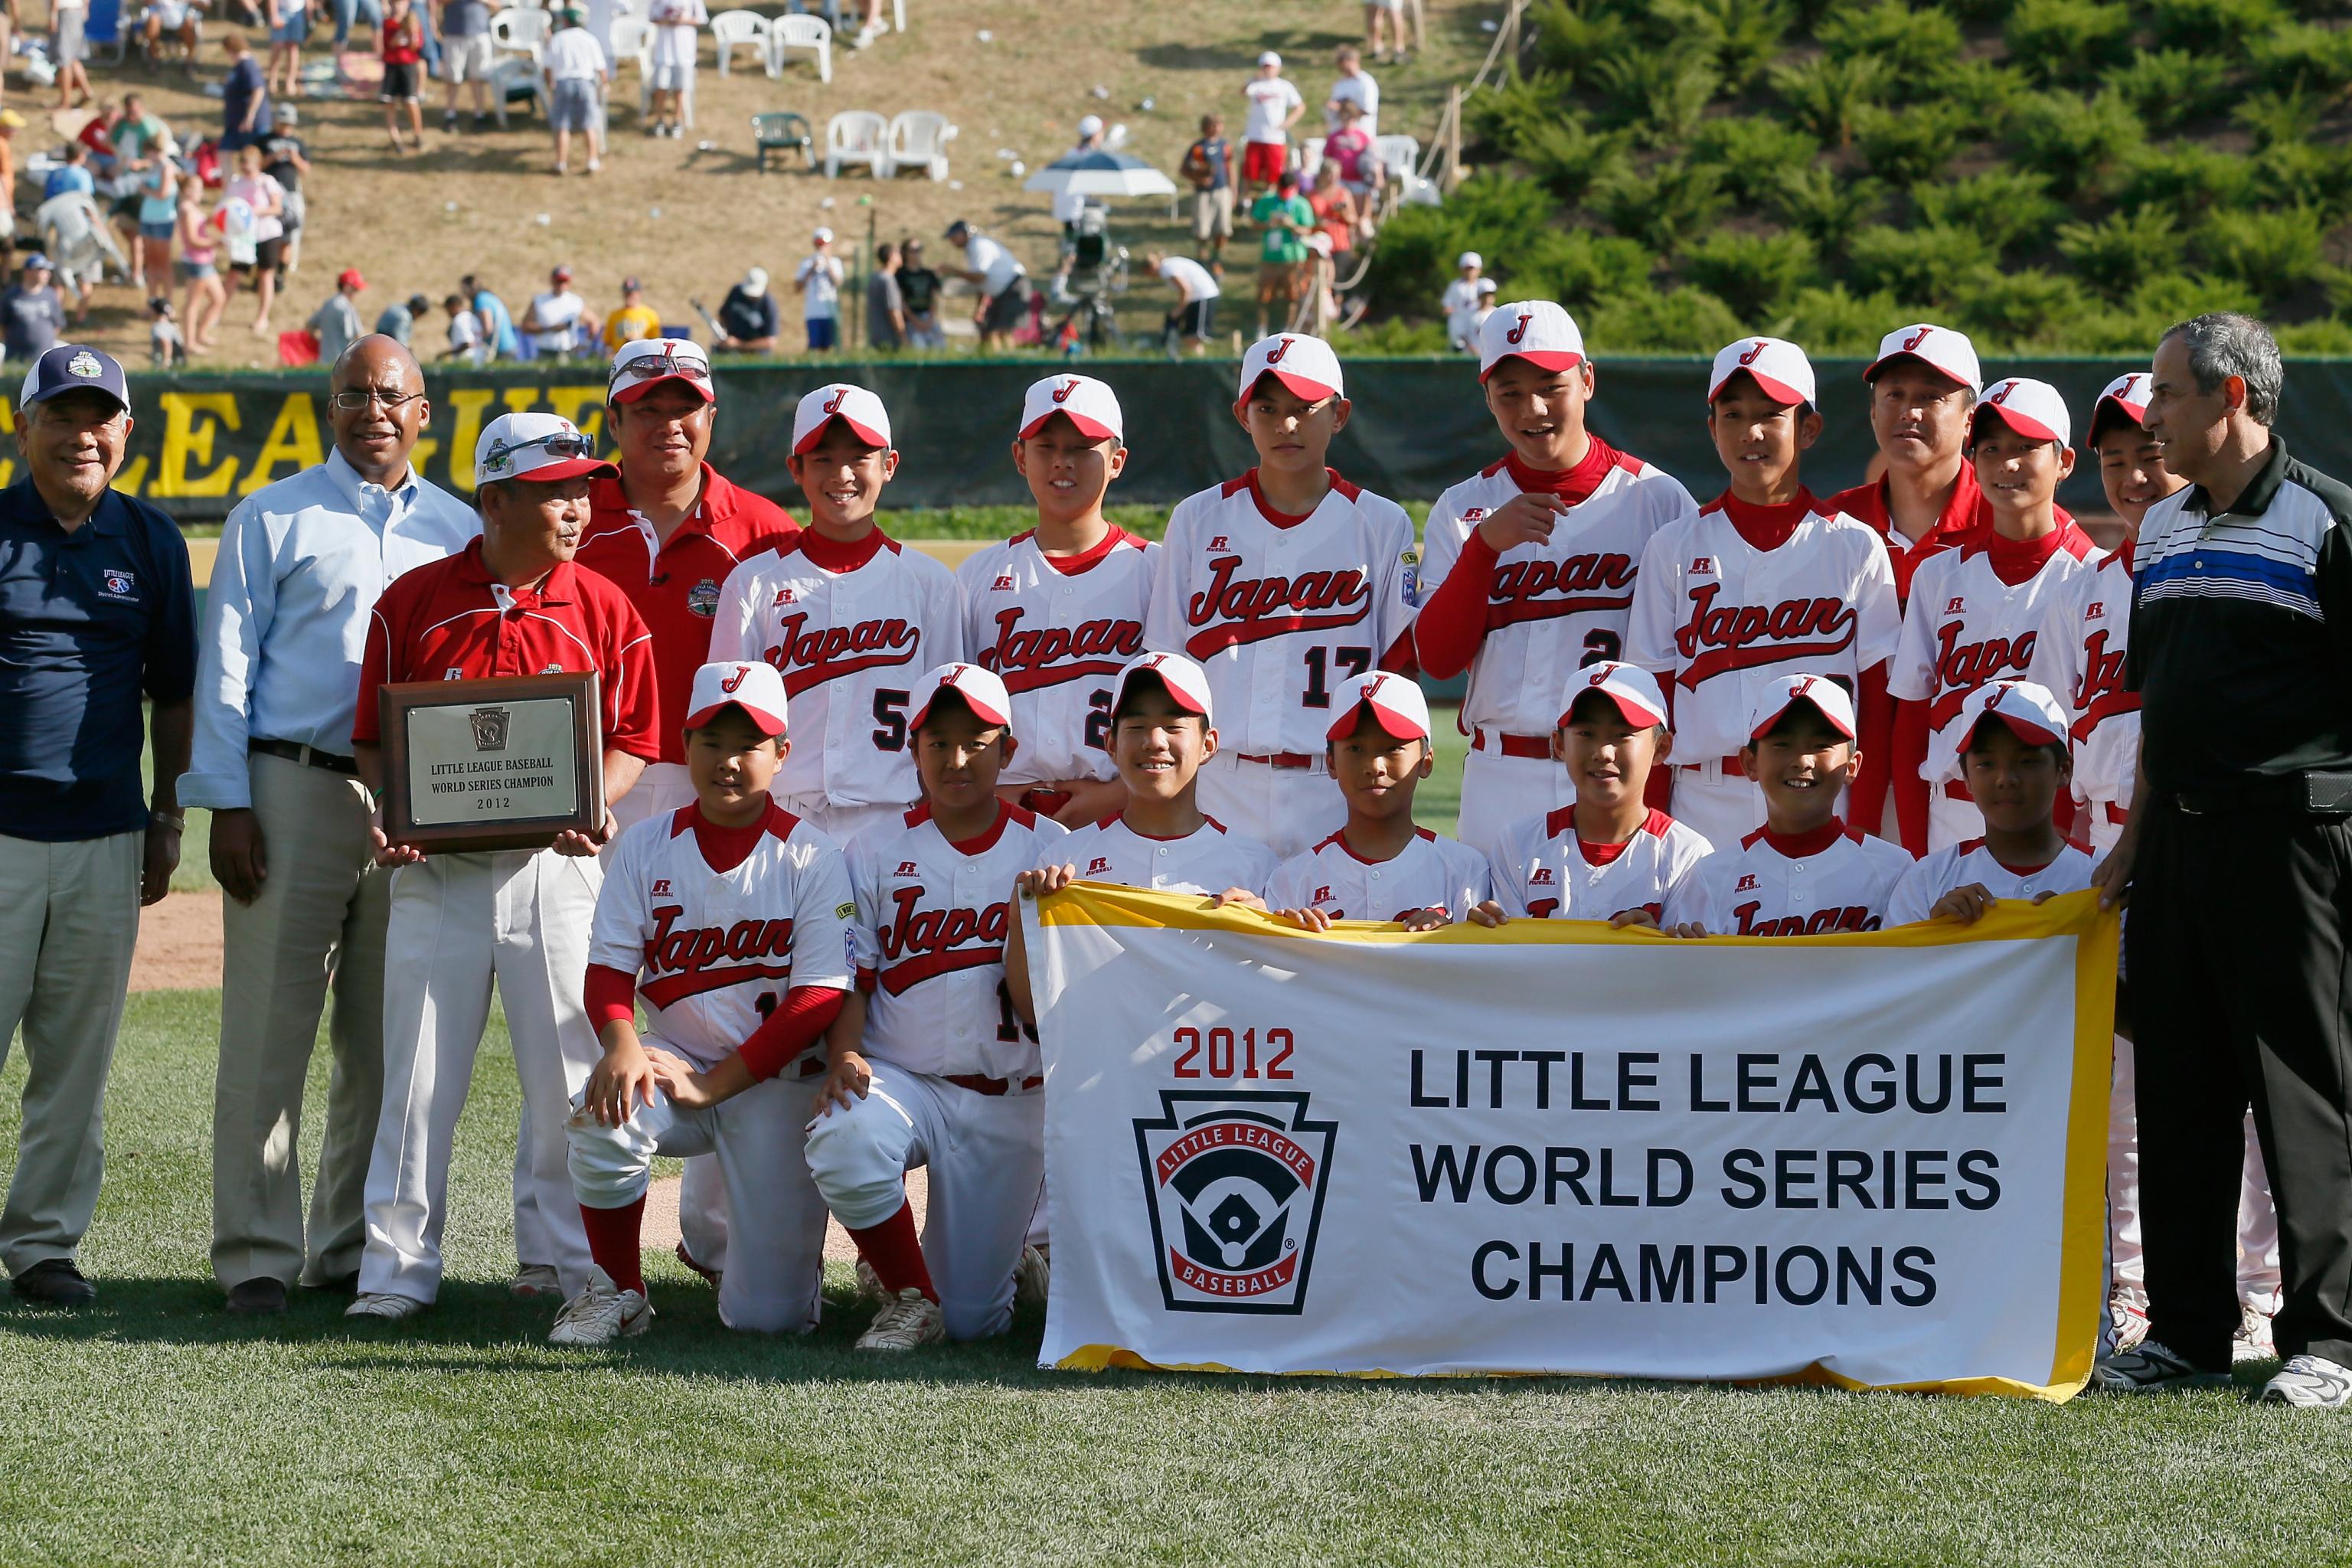 Remembering the New Castle Little League World Series team of 2012